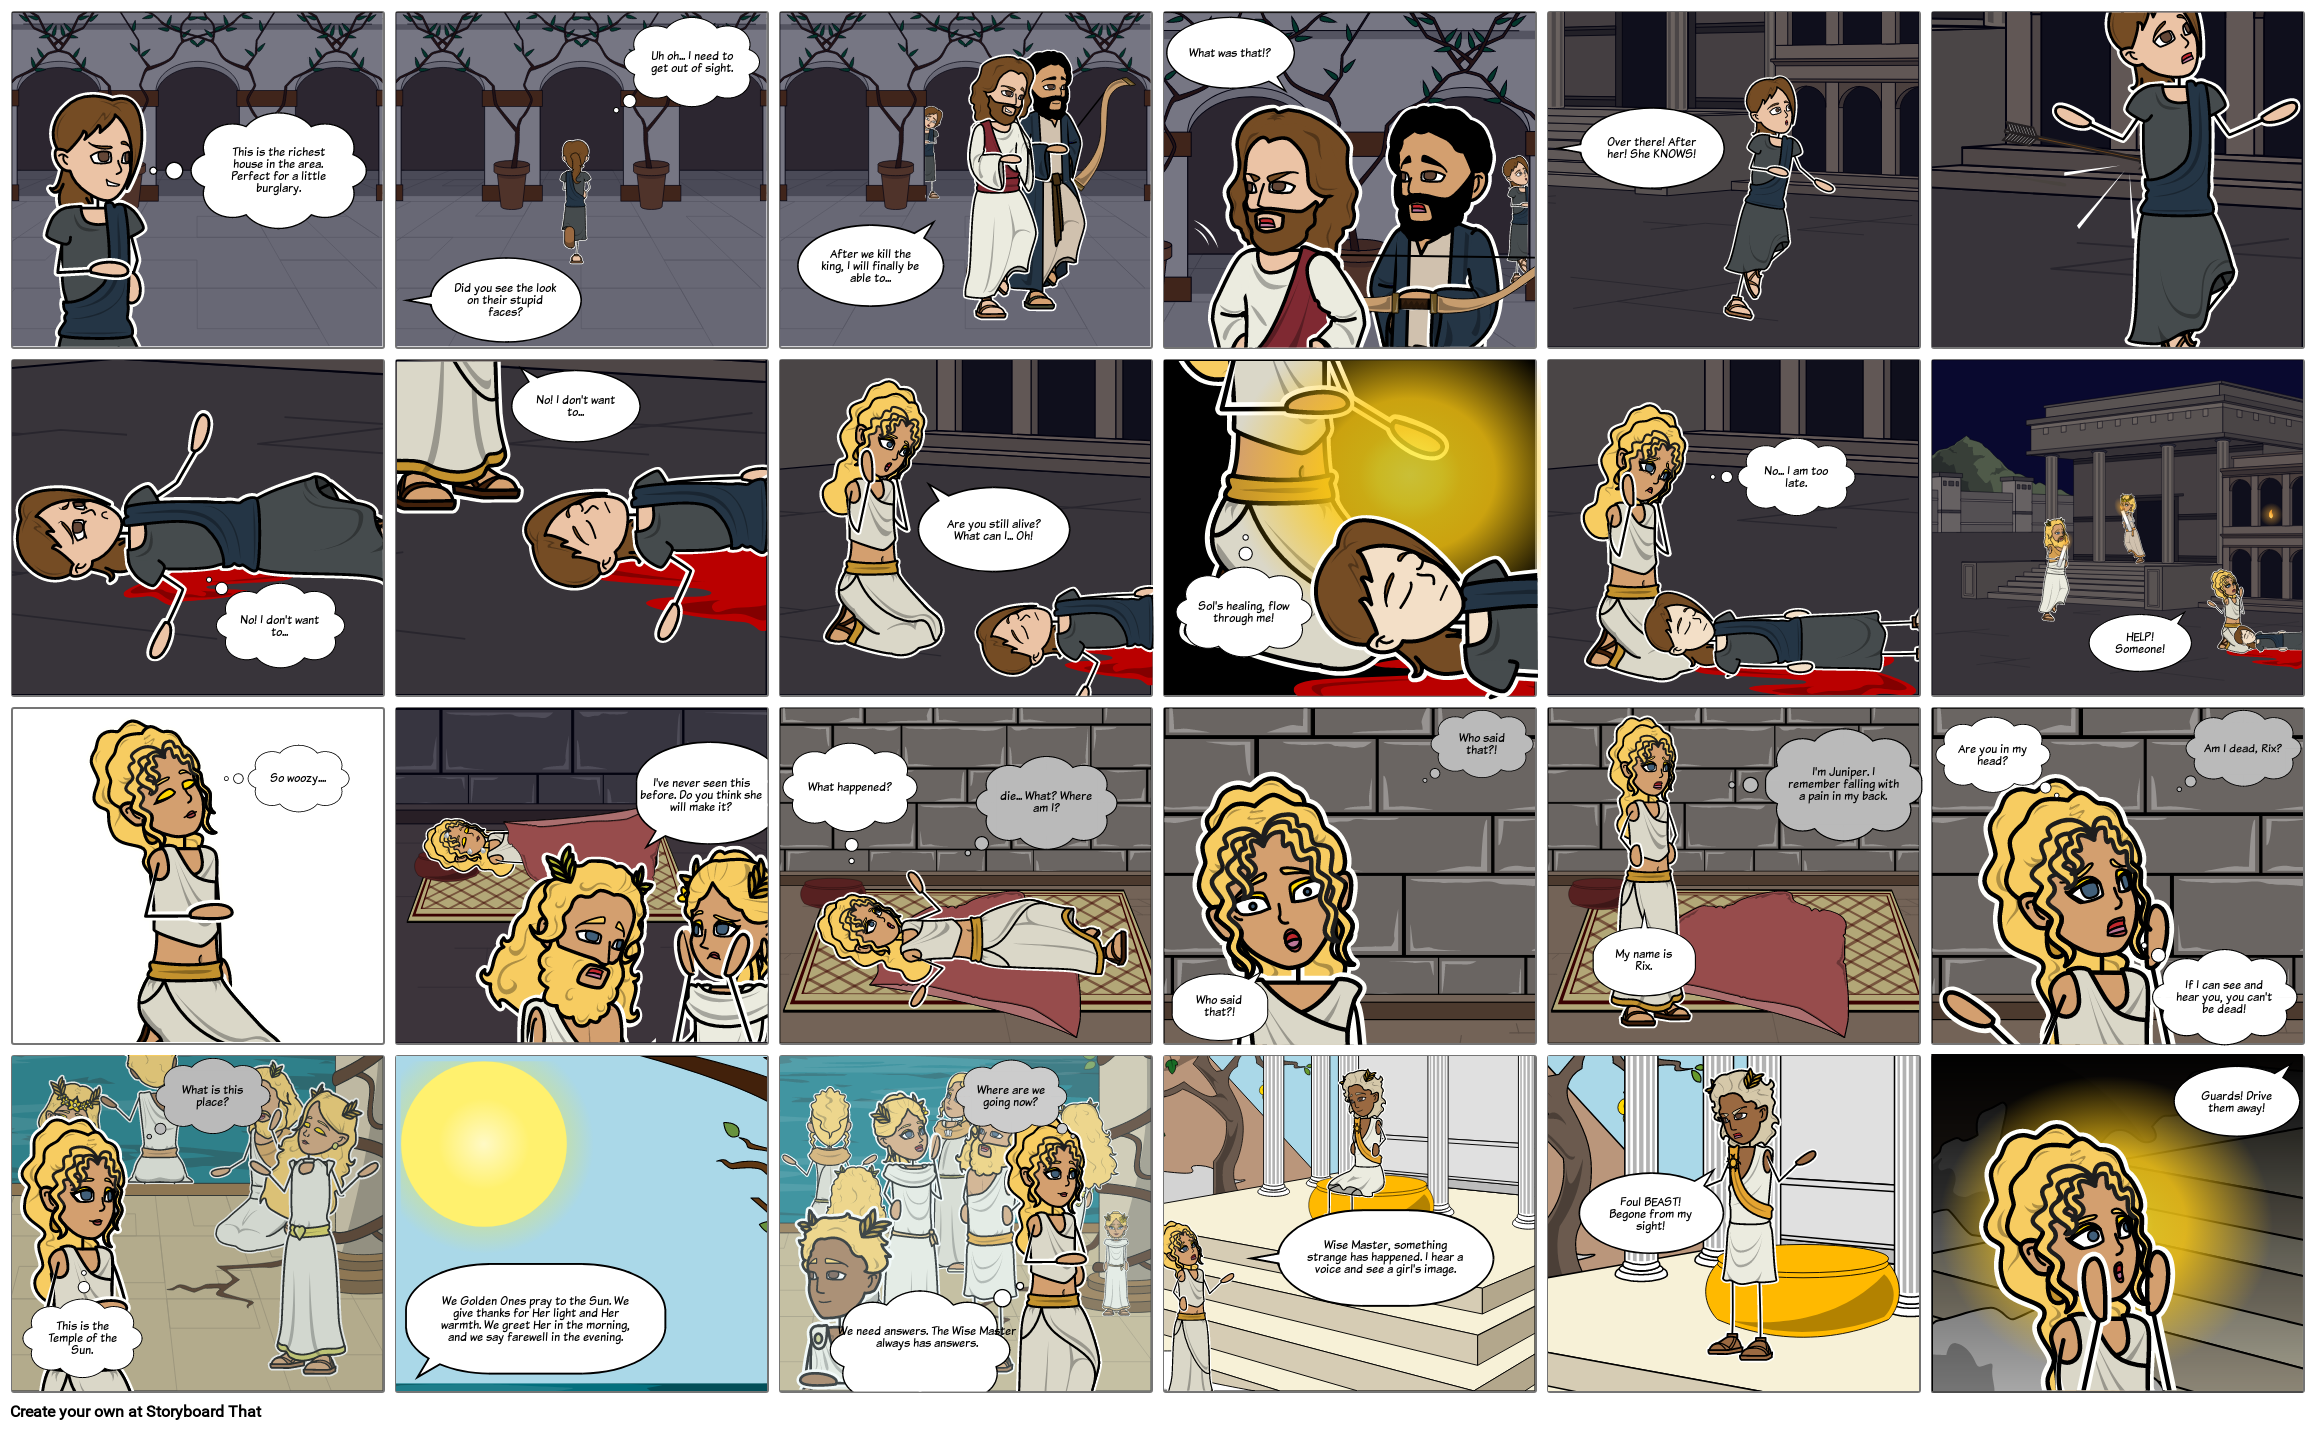 graphic-novel-example-new-kid-storyboard-by-liane